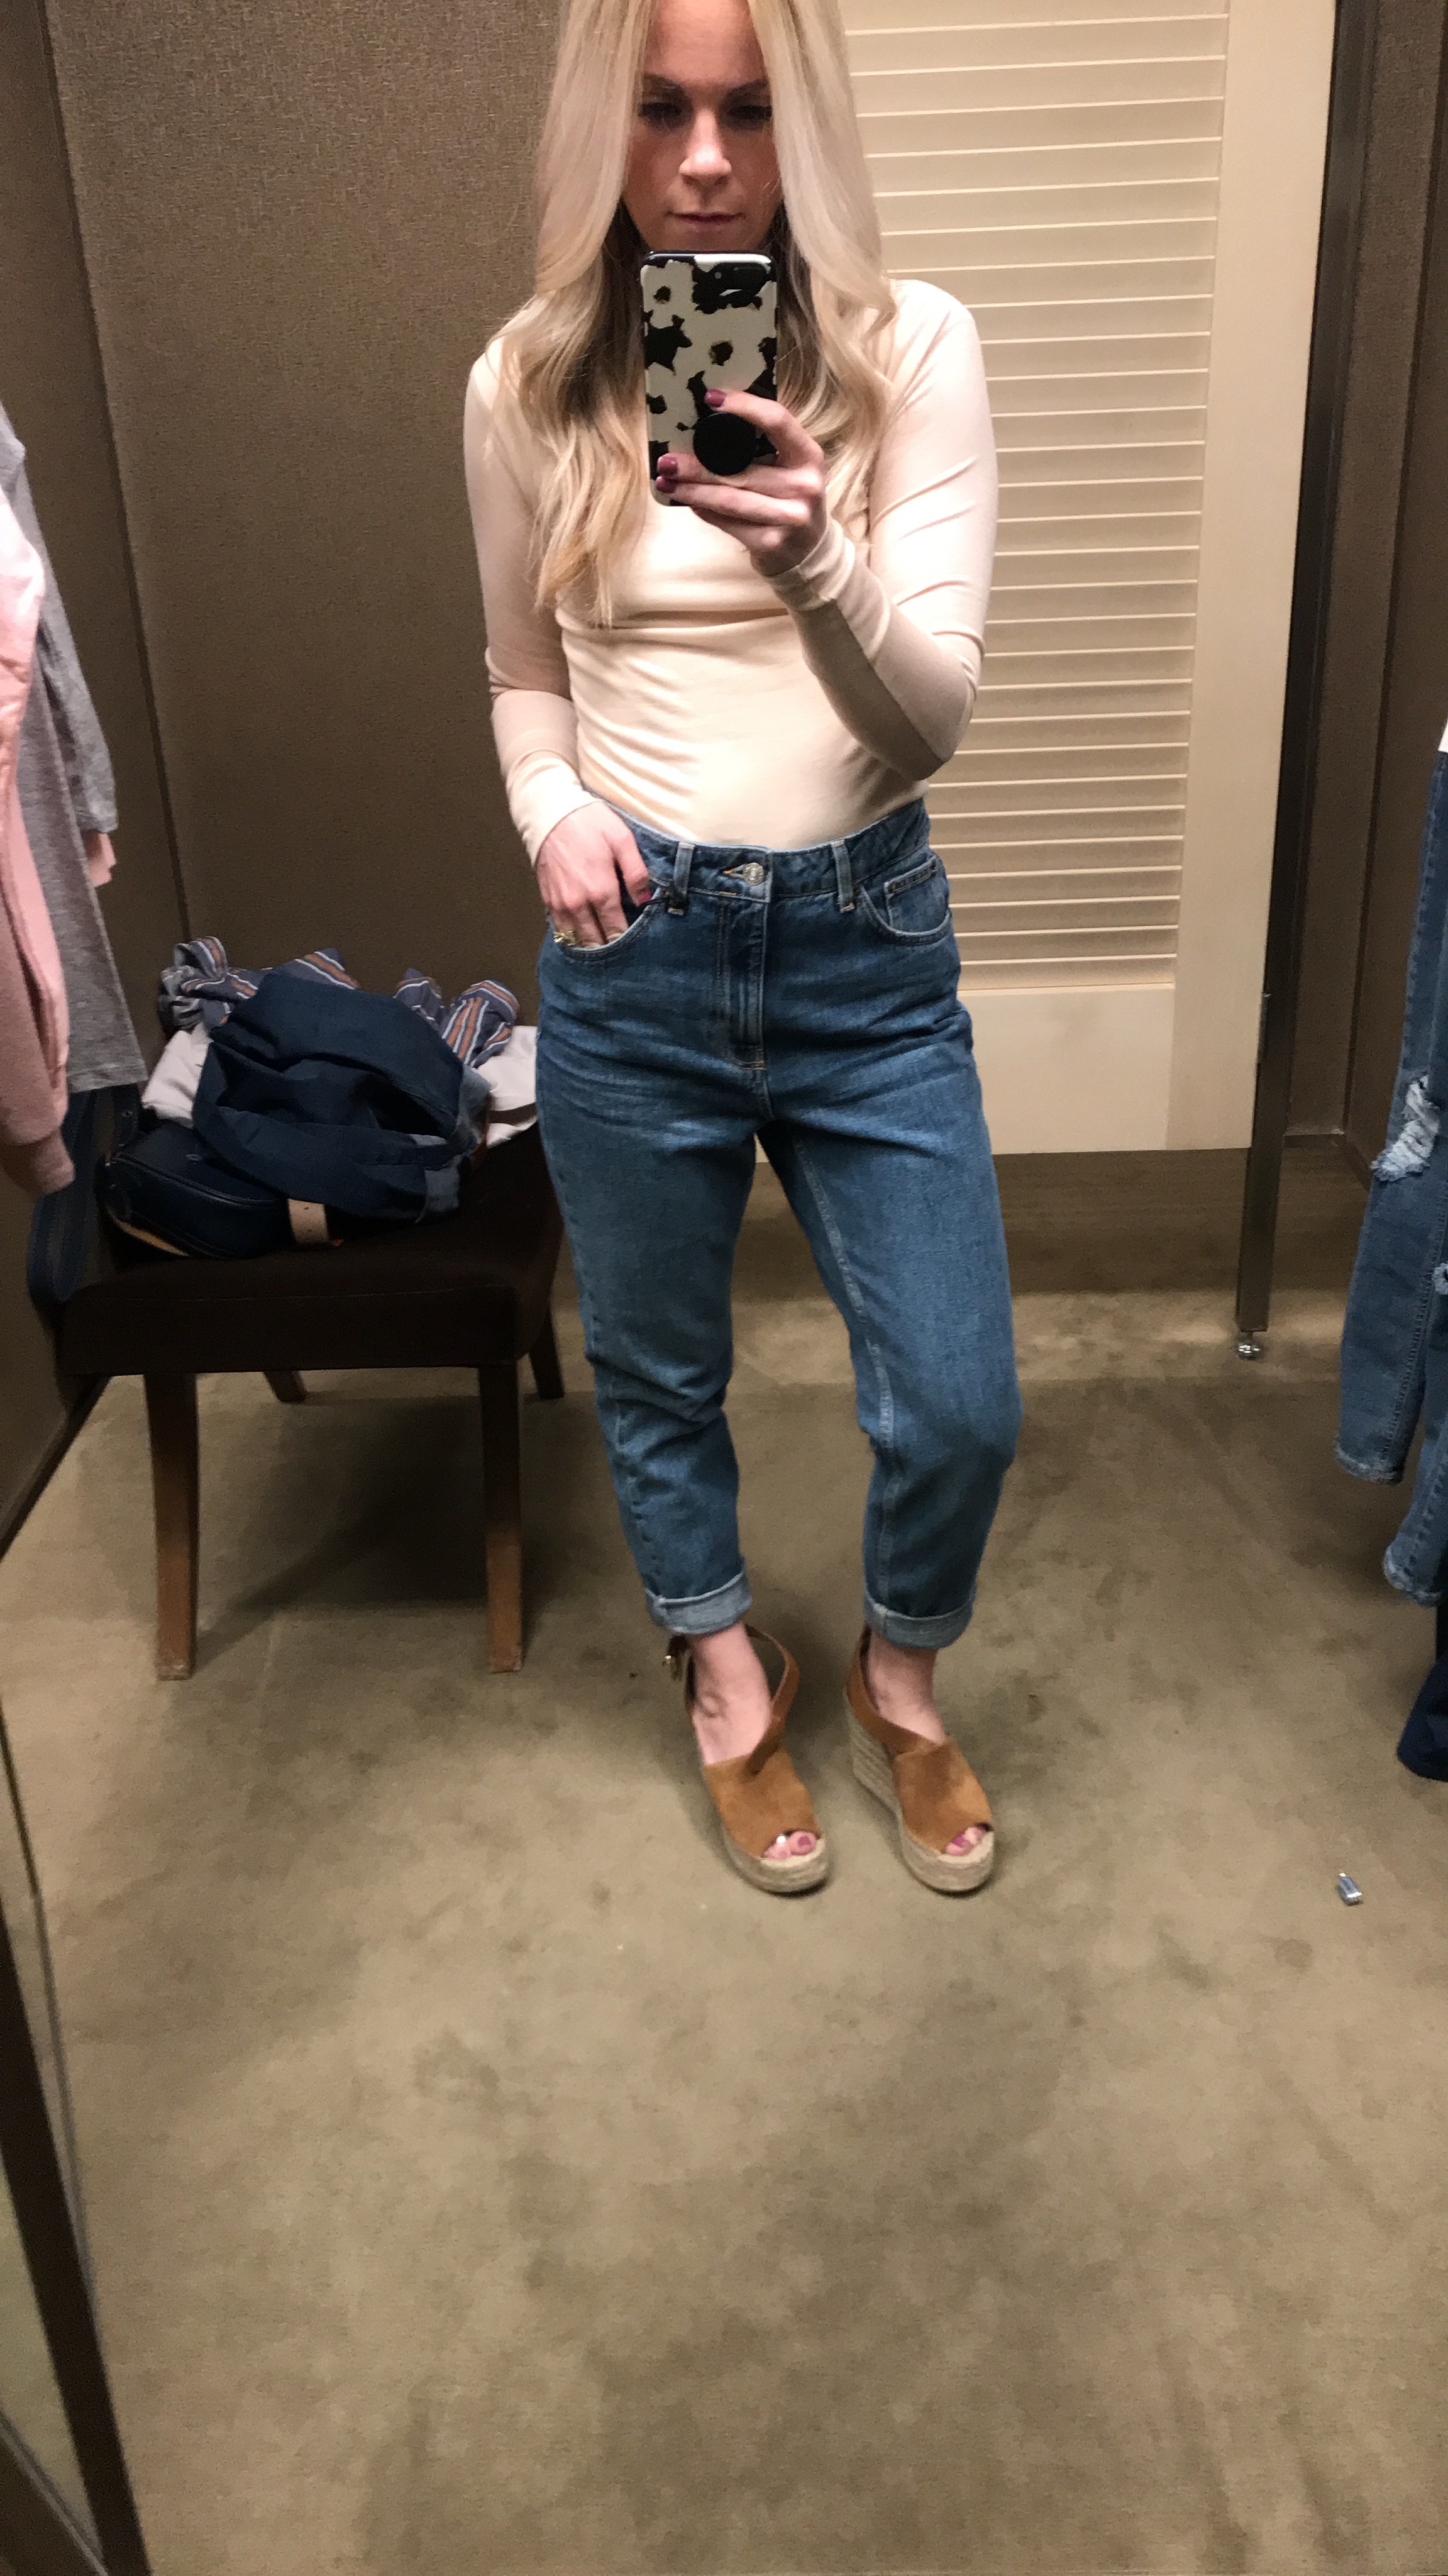 Spring Fashion Nordstrom Try on Sesh by popular Las Vegas style bloggers Life of a Sister